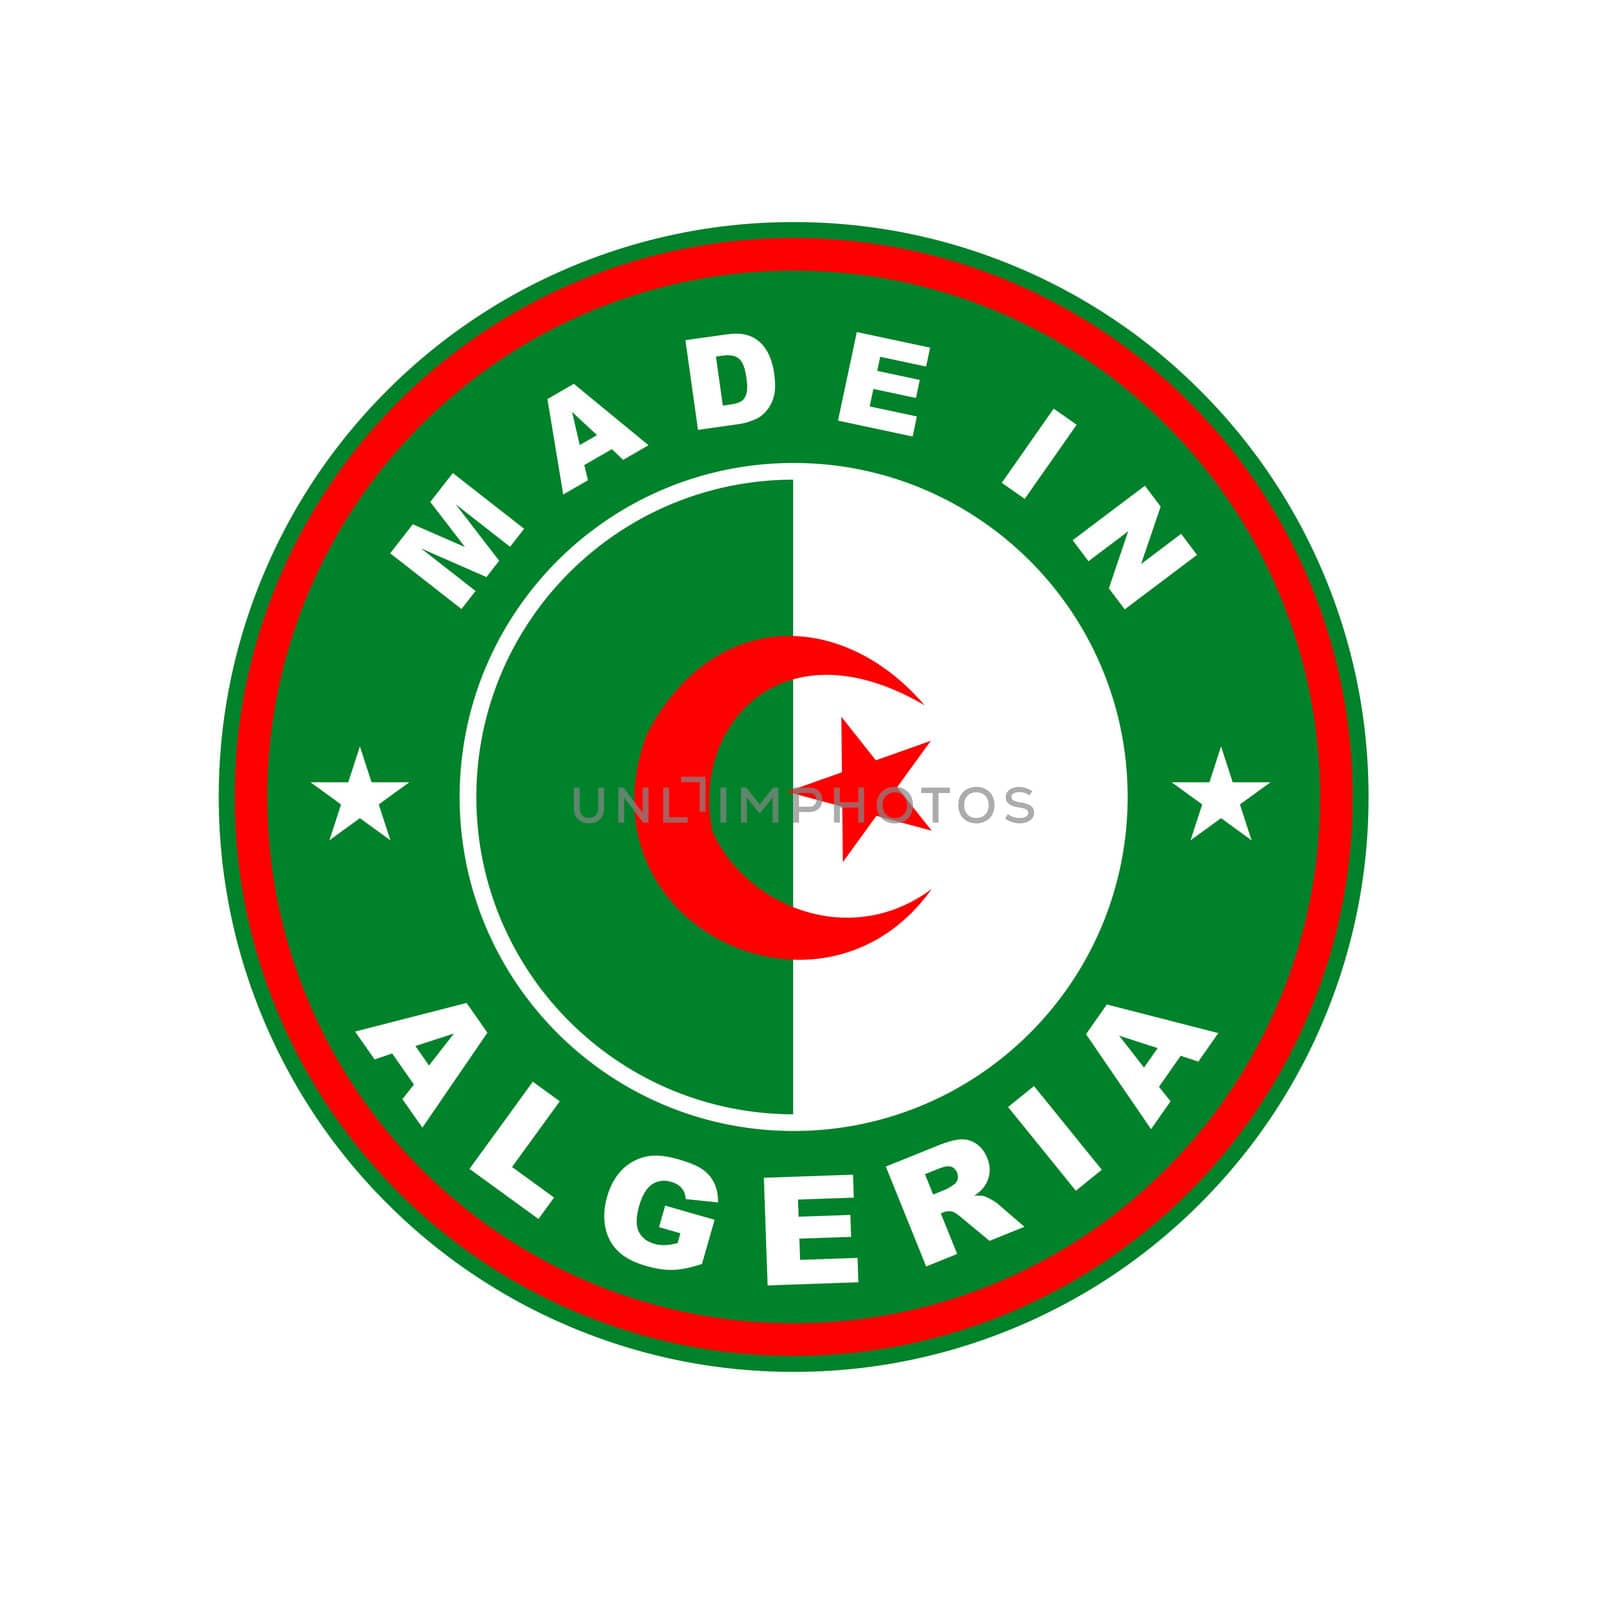 very big size made in algeria country label